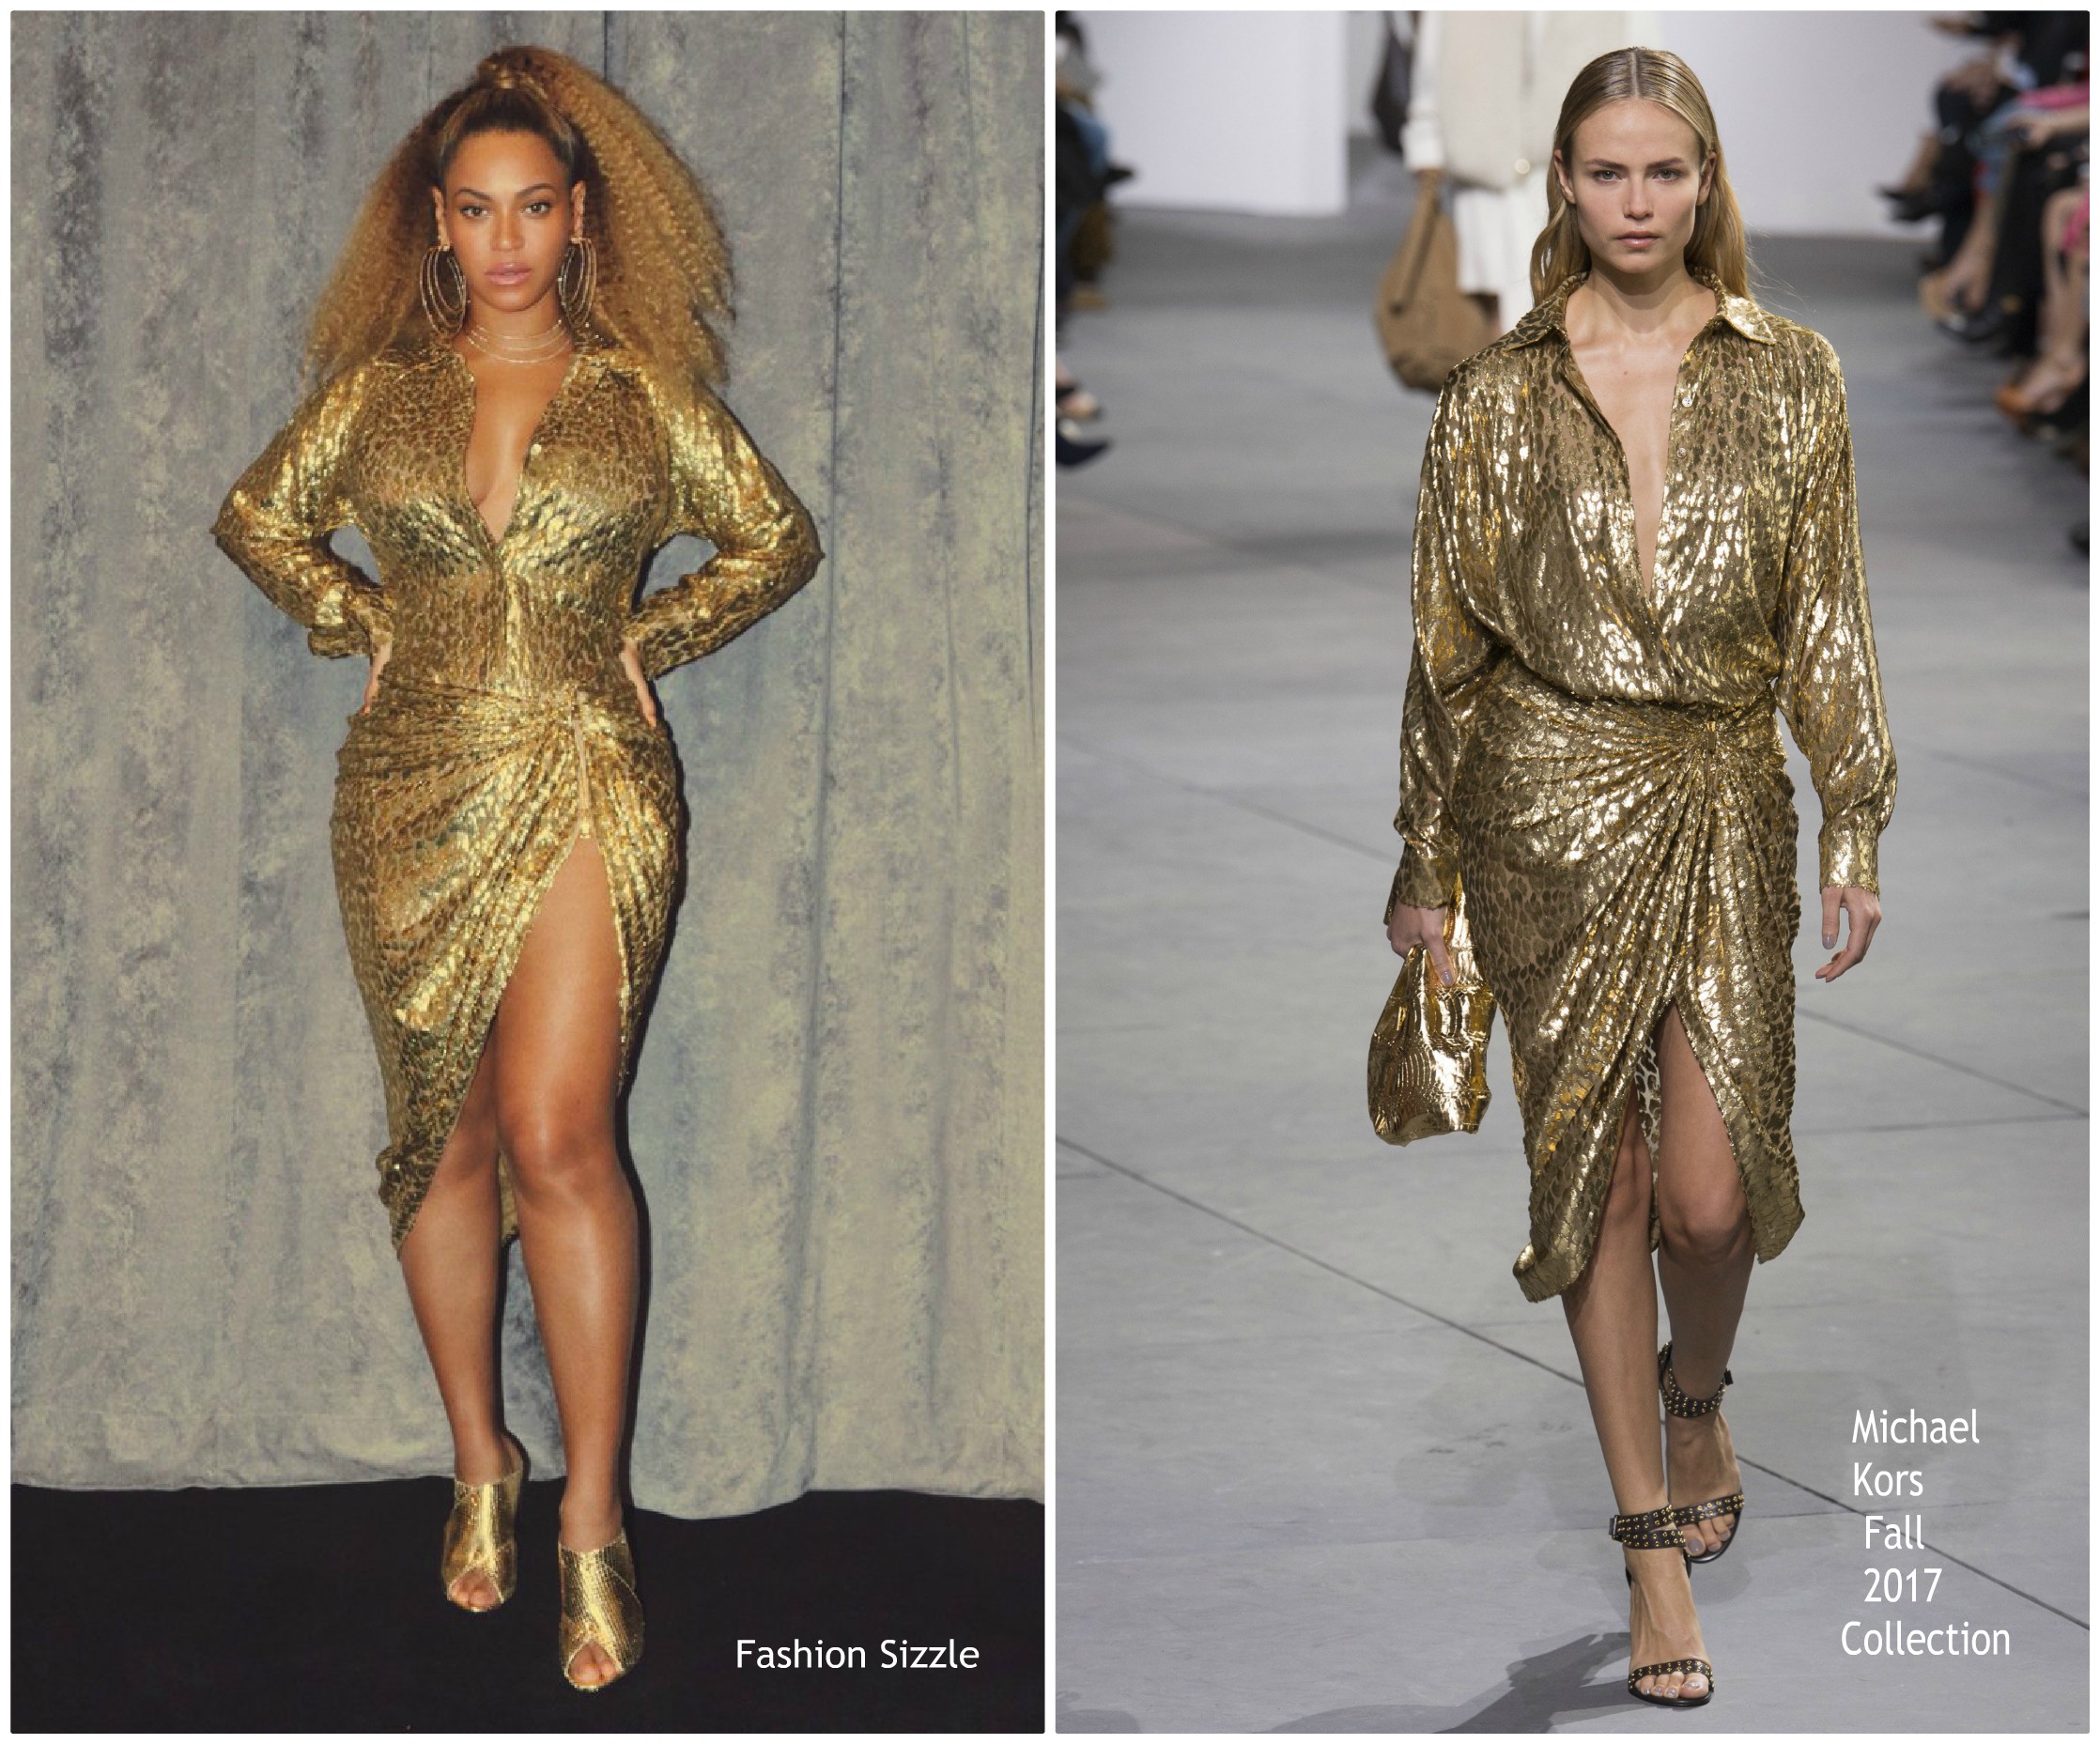 beyonce-knowles-in-michael-kors-collection-instagram-pic